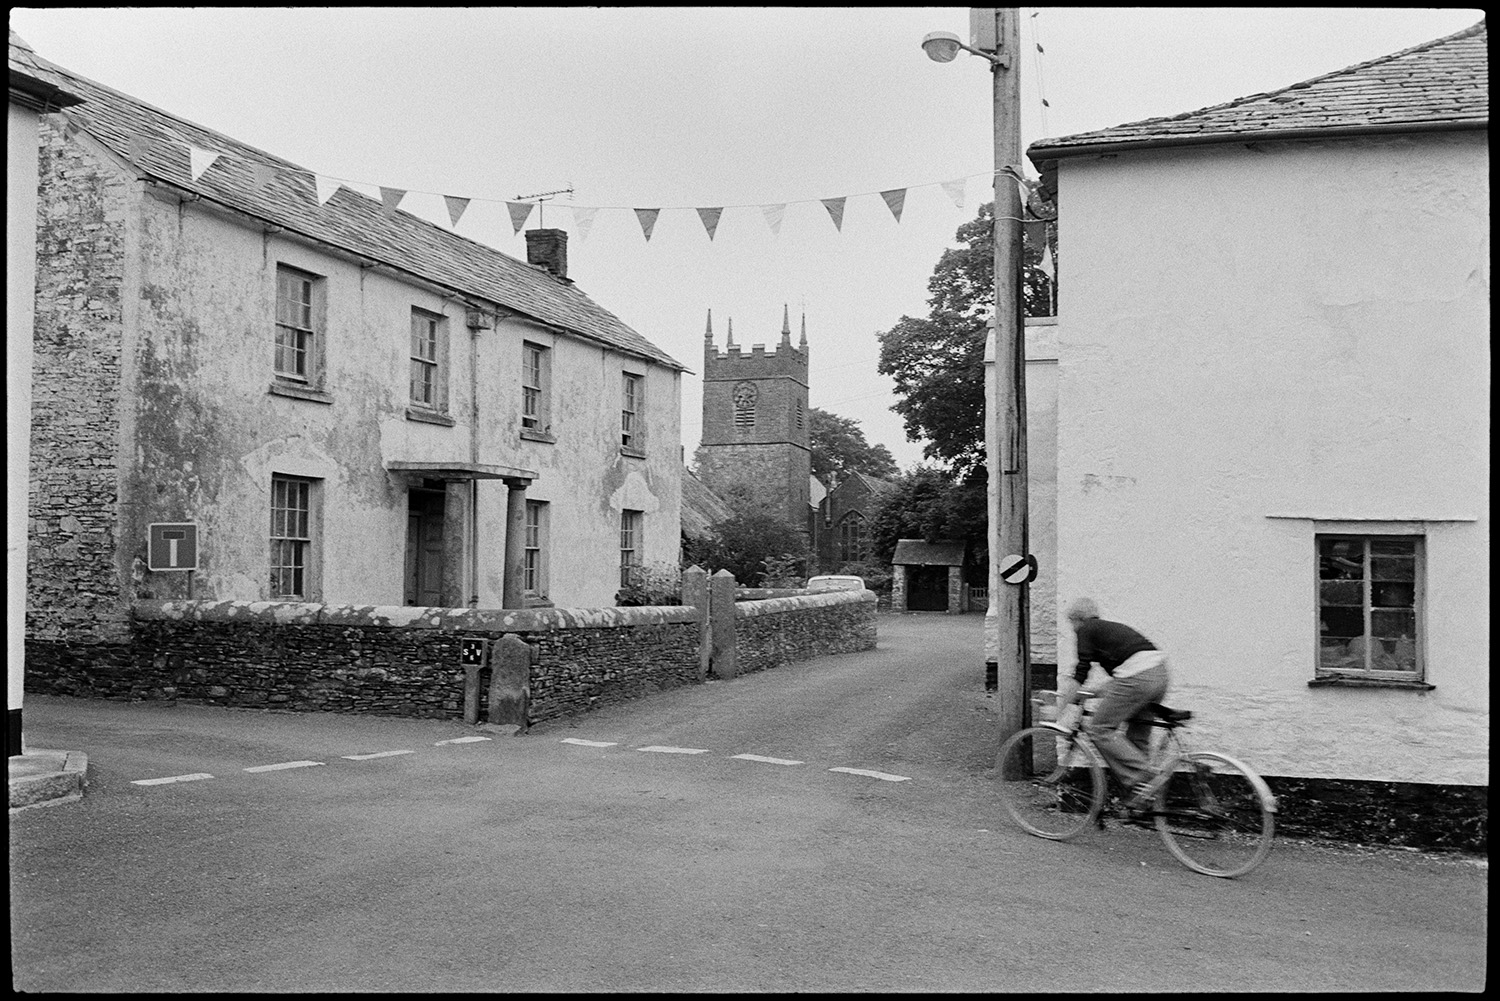 Street scenes, cars parked and bicycles, house with porch with stone pillars. 
[A person cycling past a road junction and houses in Northlew. The street is decorated with bunting. One of the houses has a porch supported by stone pillars. Northlew Church tower can be seen in the background.